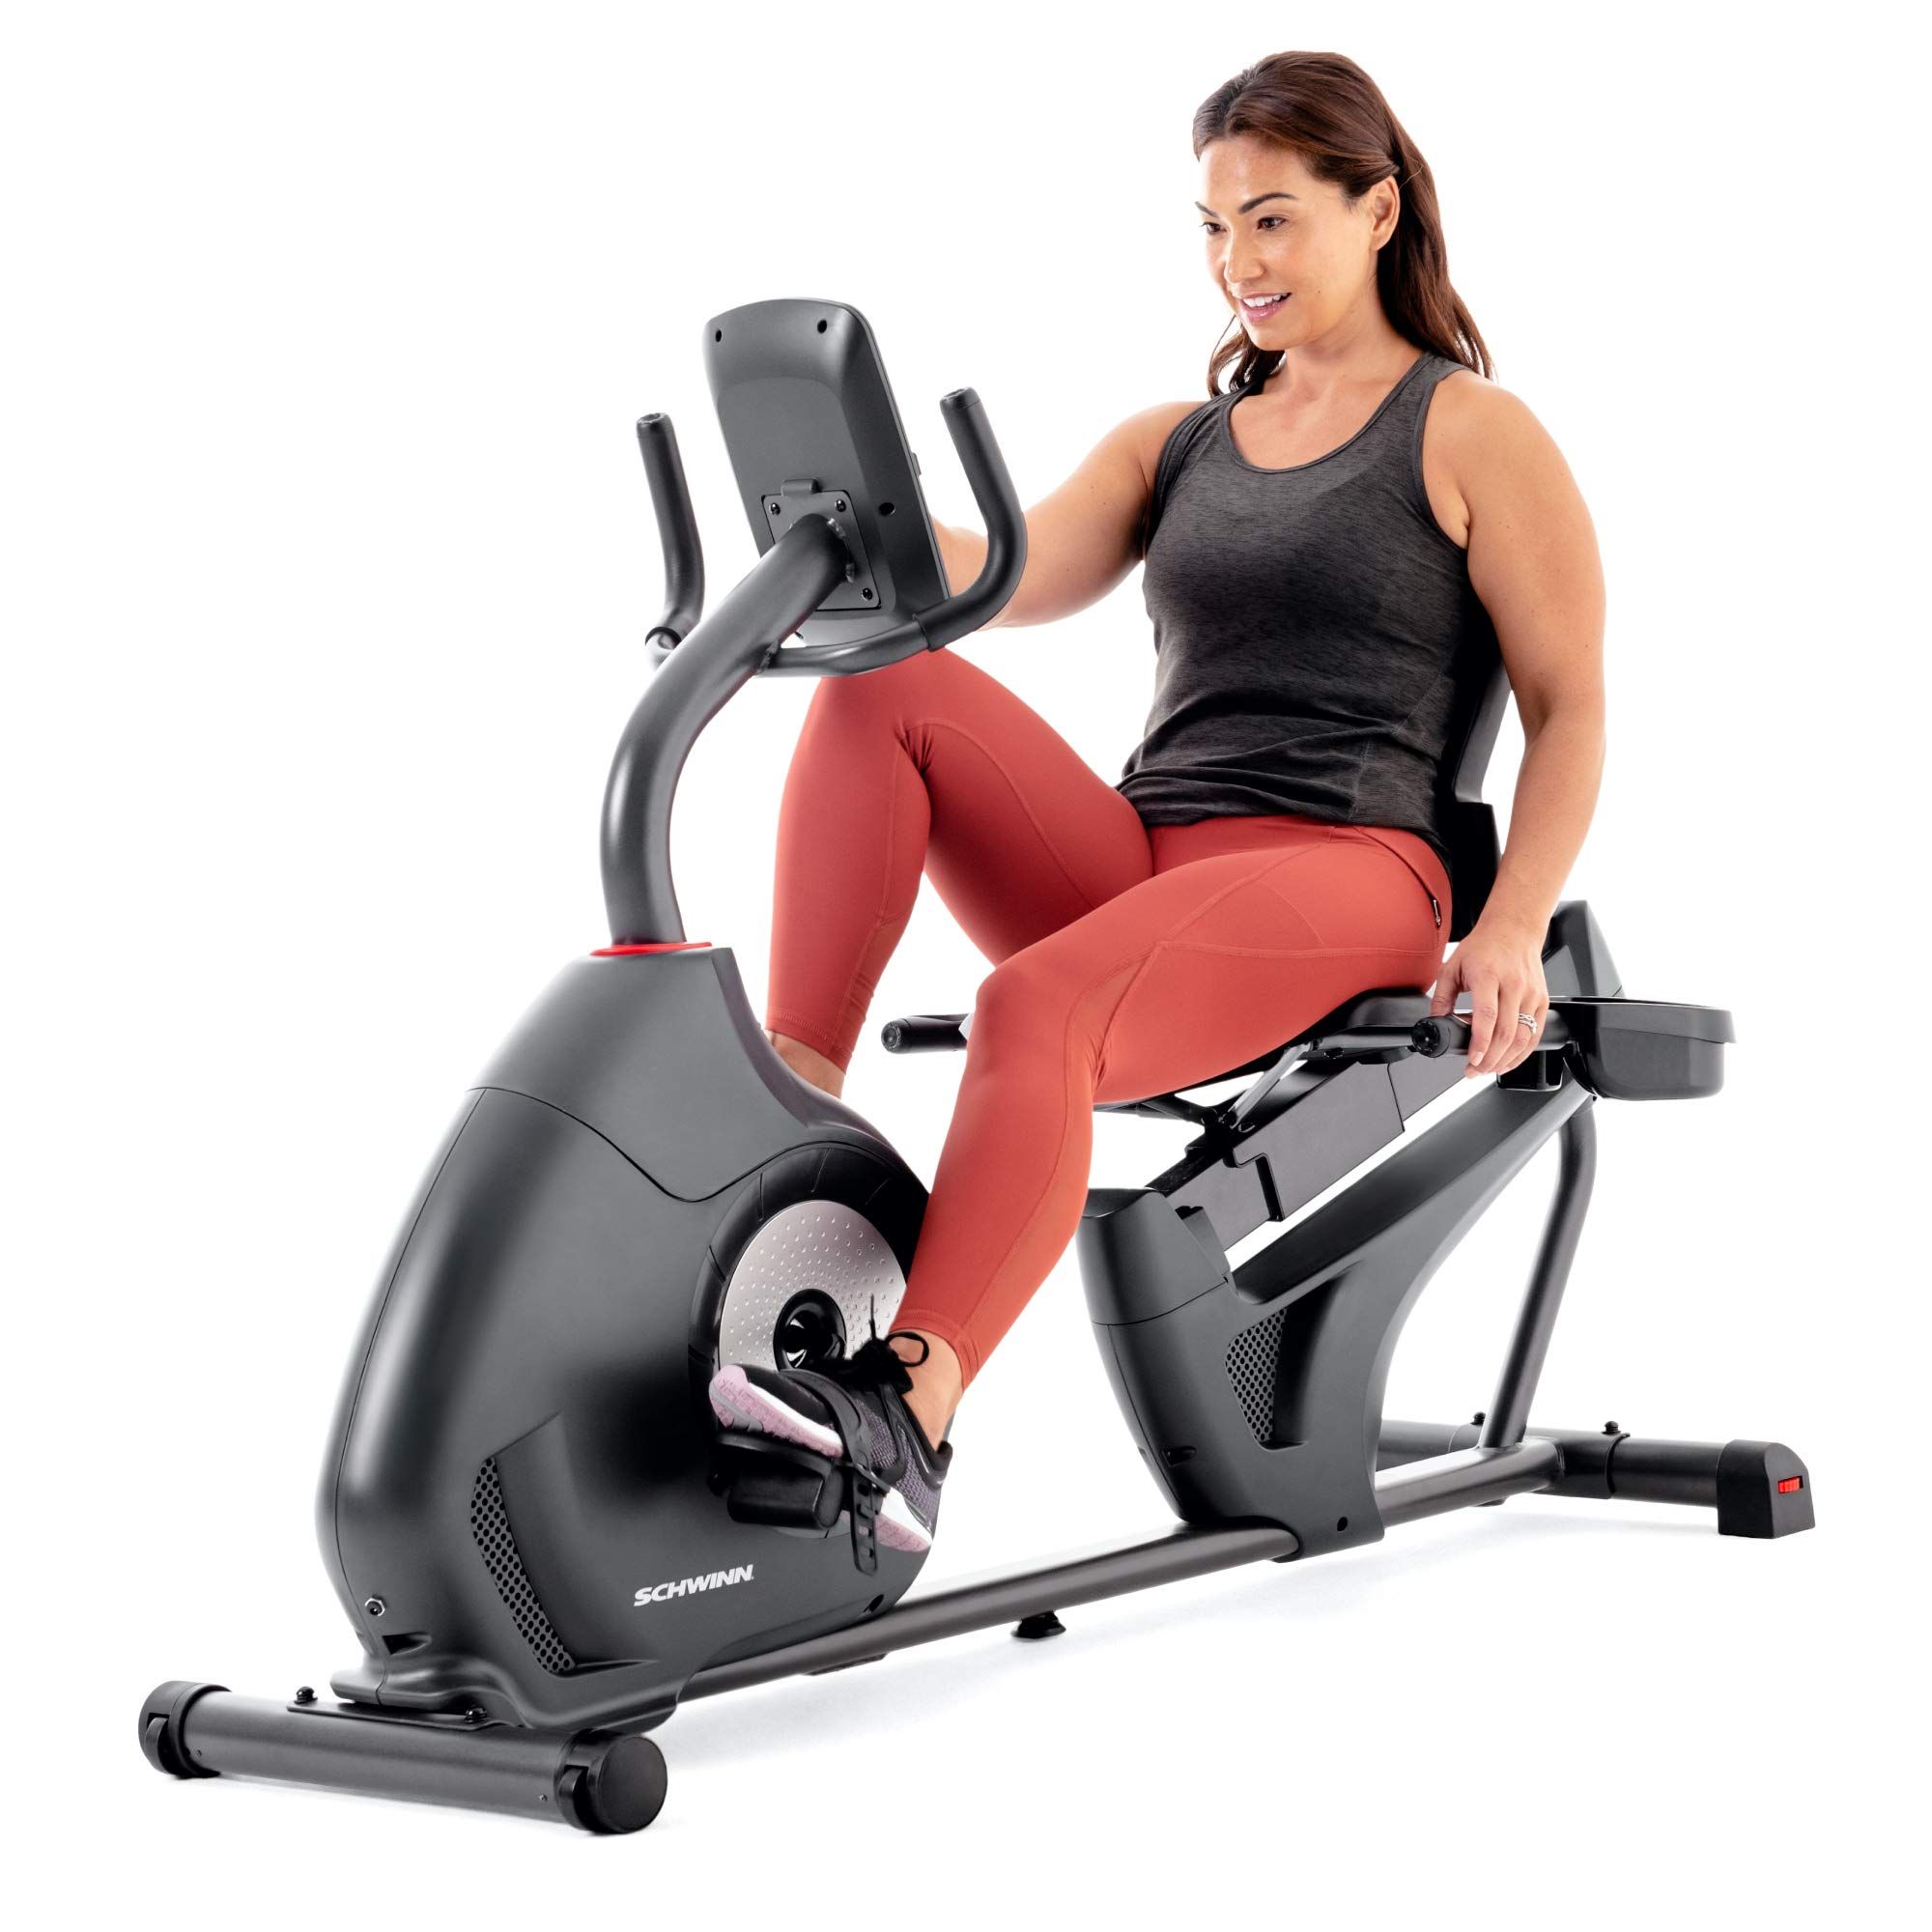 <p><strong>$549.00</strong></p><p>If you've ever wished you could sit back and lock in on a ride without having to change gears, you're in luck. This bike from Schwinn Fitness comes with 100 plus global routes that auto-adjust in real time while you're riding. It also offers 13 programs and is compatible with the Zwift fitness app.</p><p><strong>Rave Review: </strong>"This is a great bike. It is practically noiseless, offers several workouts, and is quite easy to move. I frequently move it into the next room for use if the rec room is occupied. It is used and enjoyed by everyone in the family. We’re impressed with the quality and ease of use. I’m very glad to have chosen this one." </p>